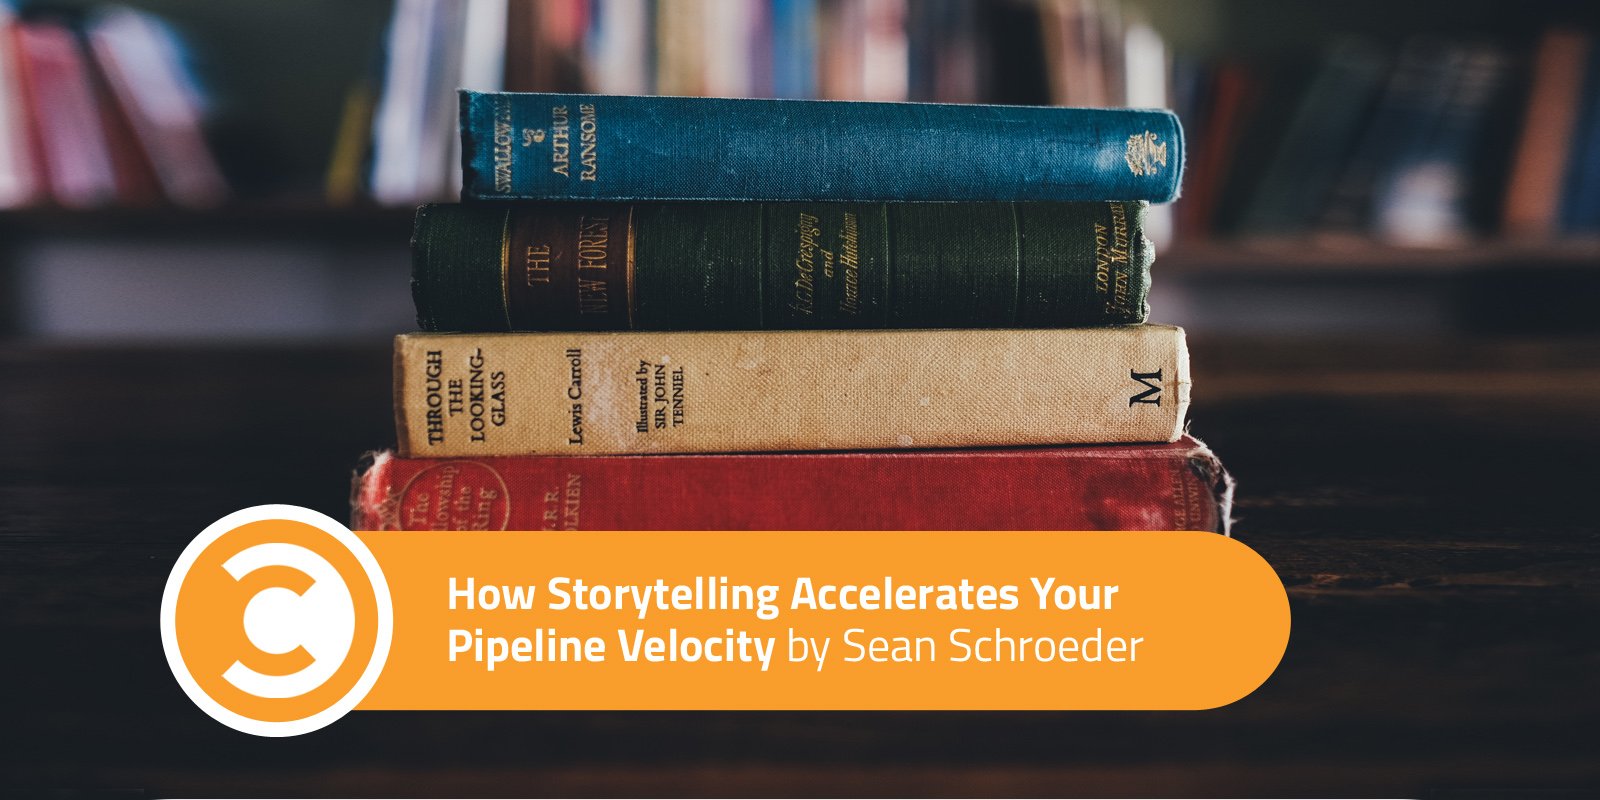 How Storytelling Accelerates Your Pipeline Velocity